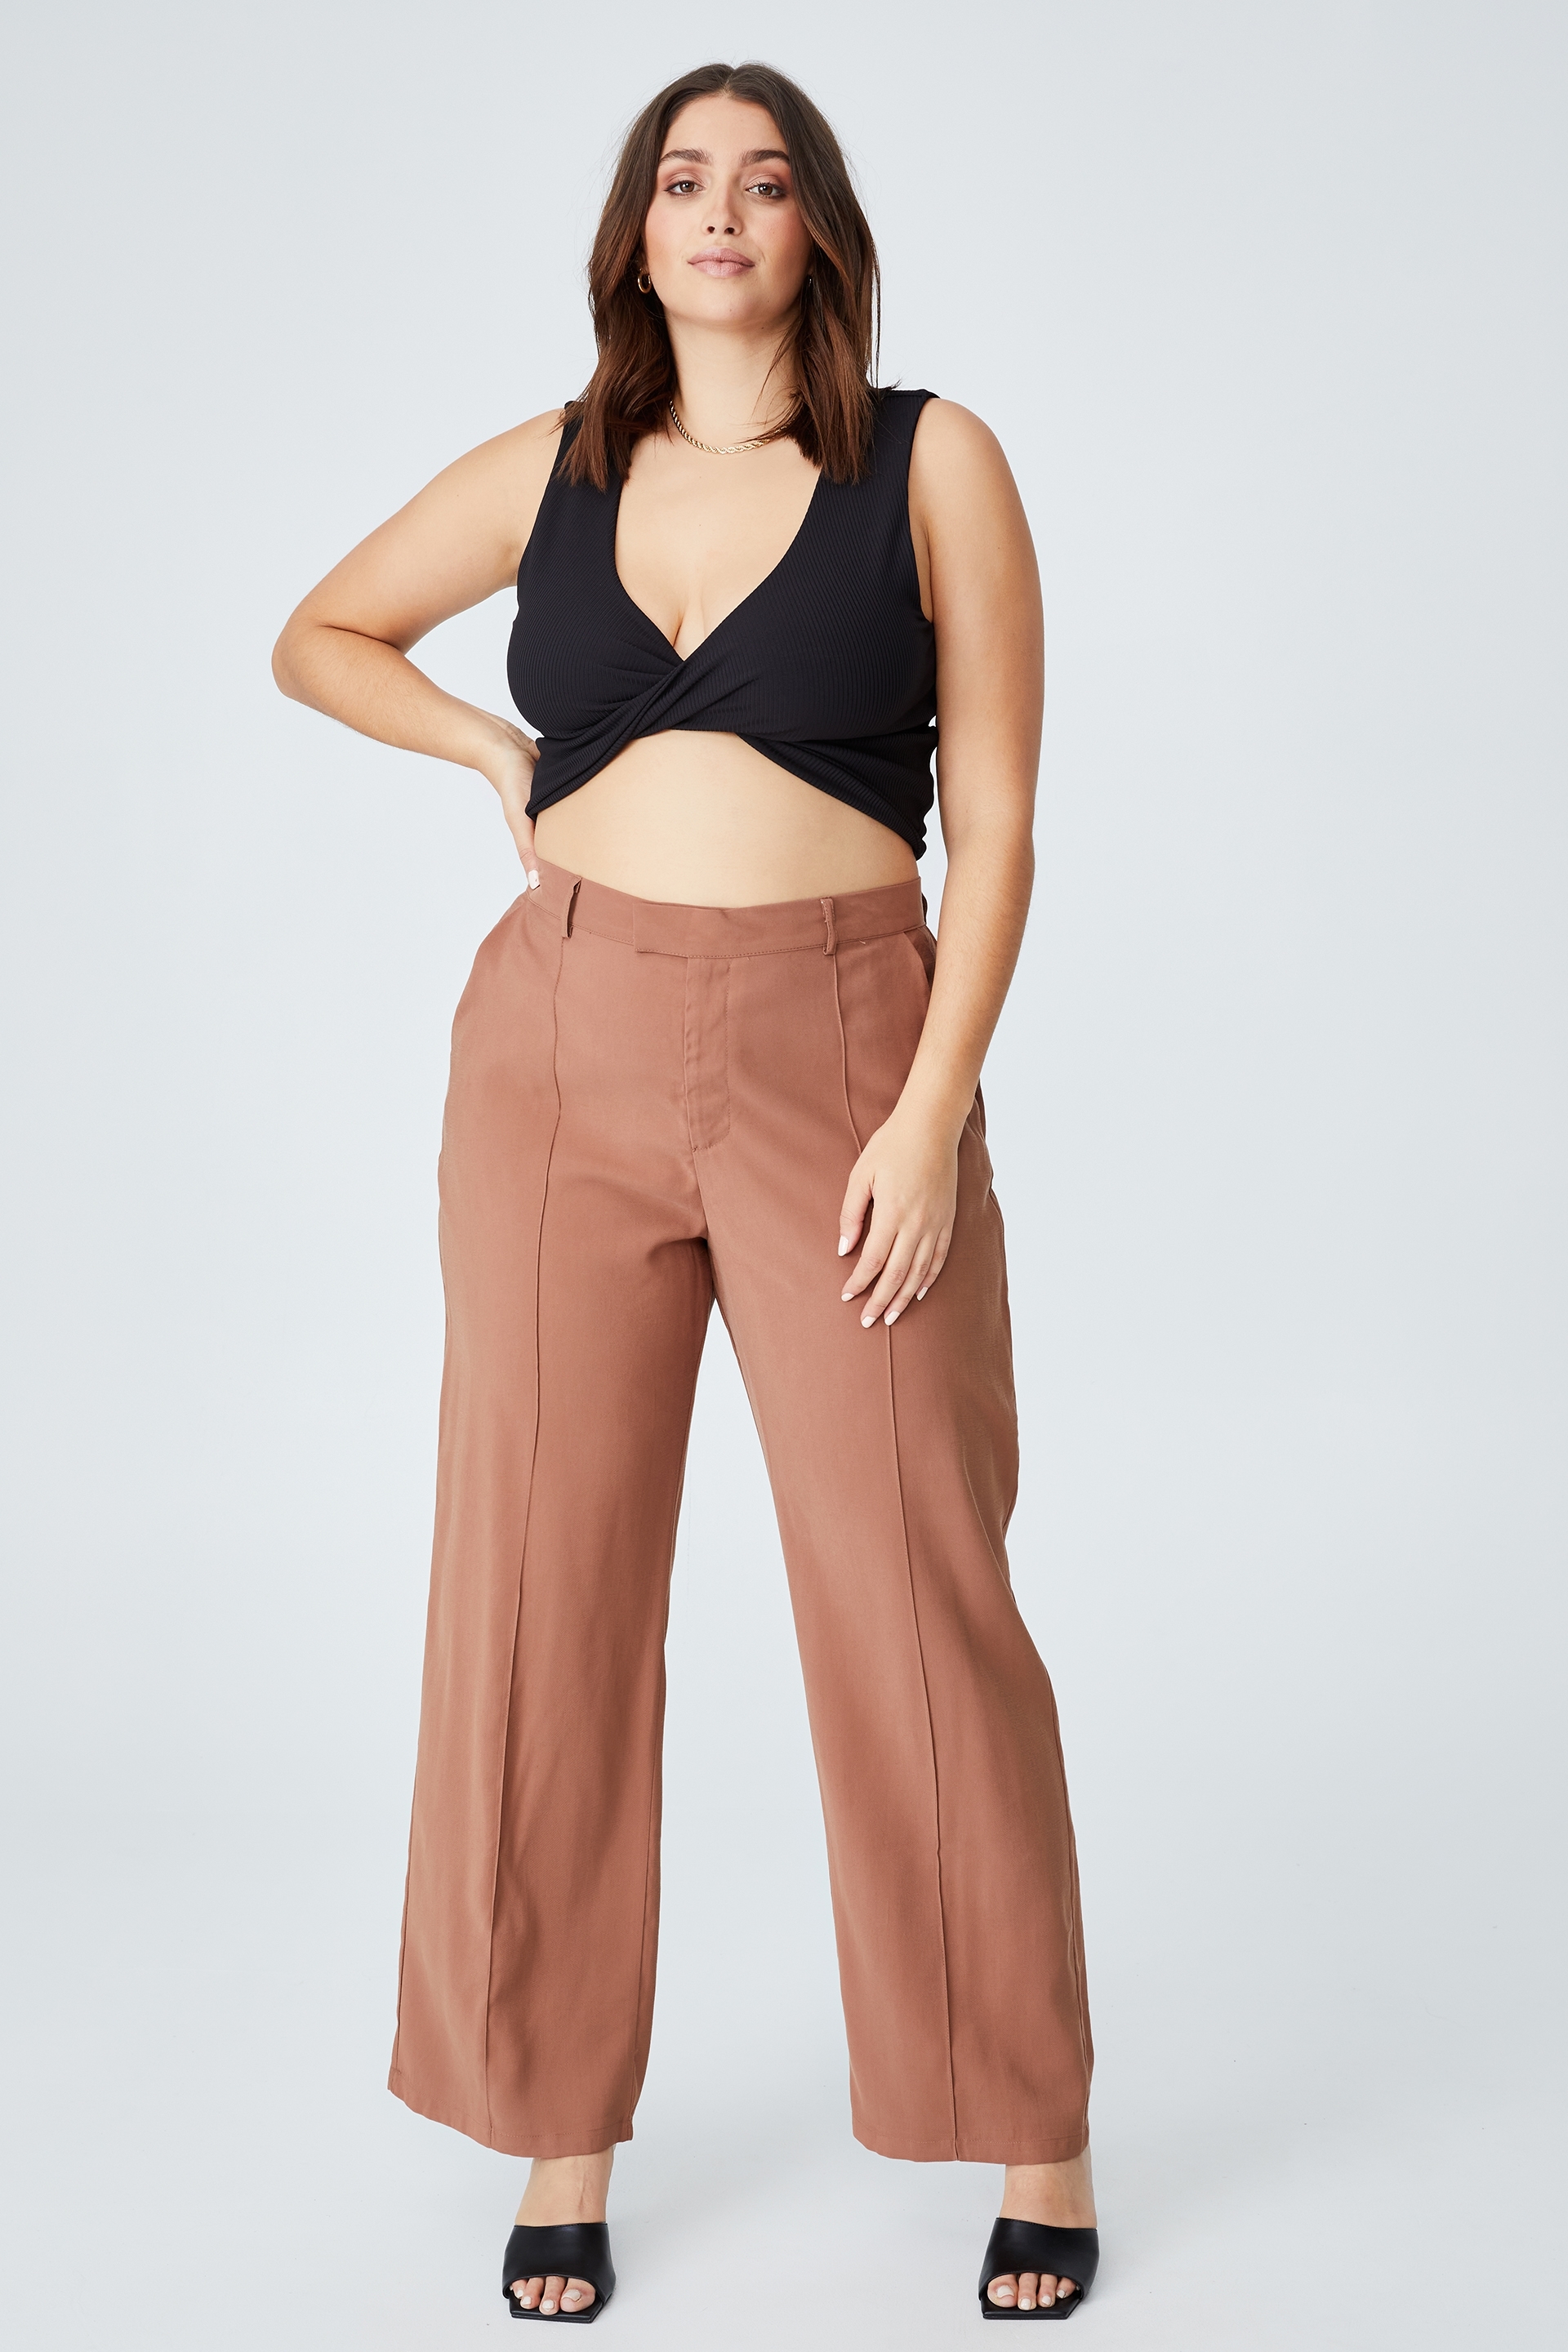 Cotton On Women - Curve Darcy Soft Tailored Pant - Cocoa bean